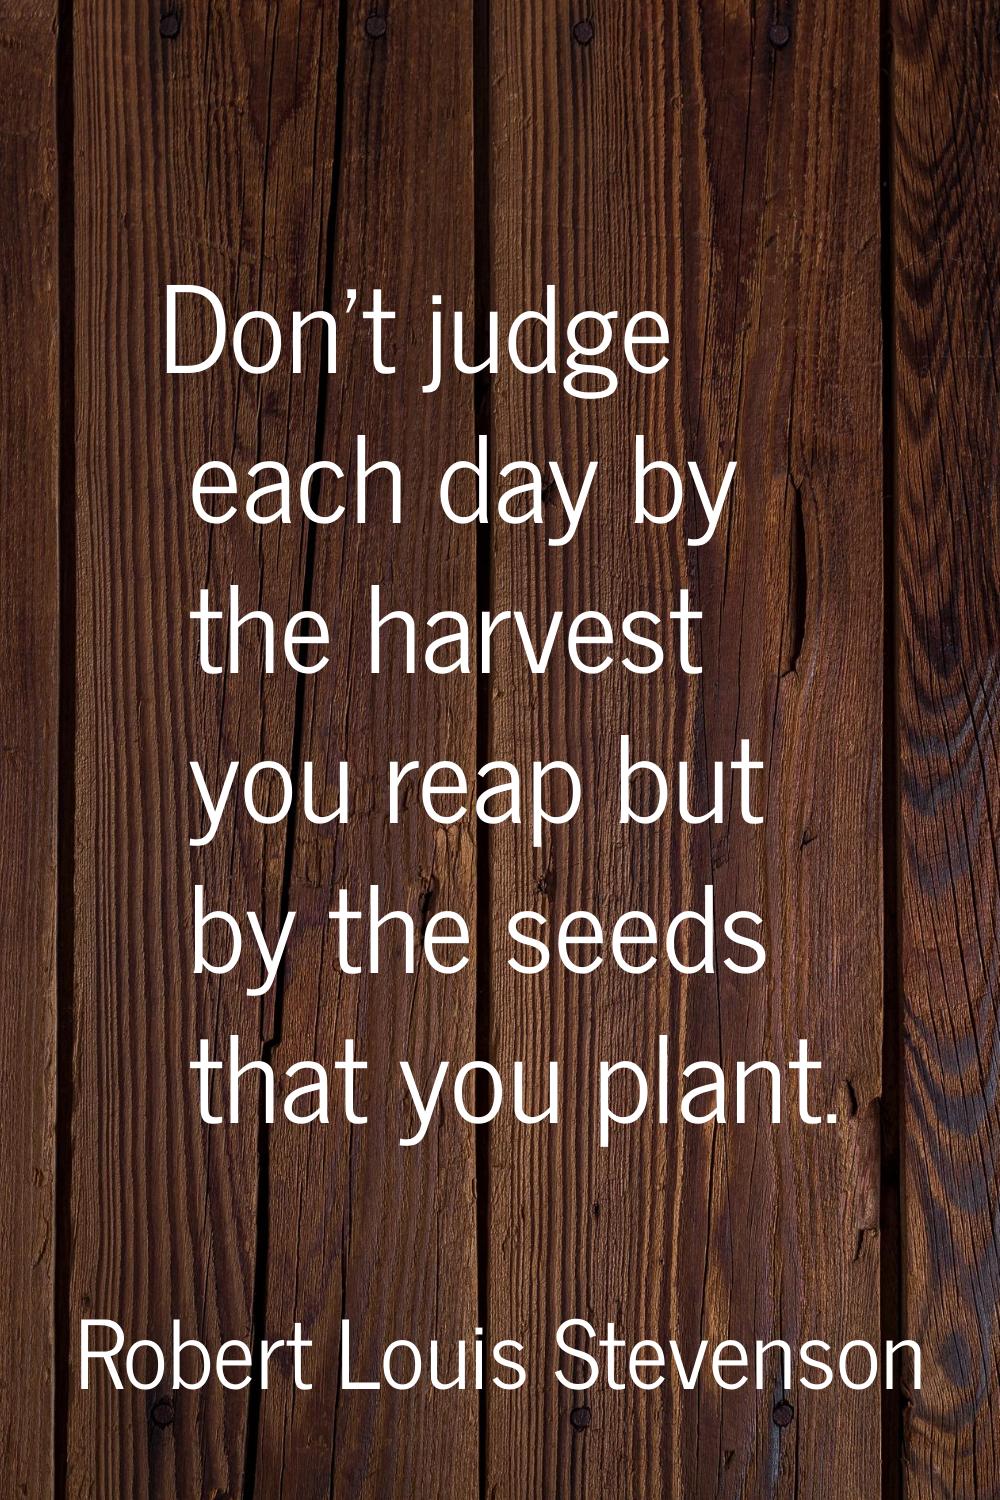 Don't judge each day by the harvest you reap but by the seeds that you plant.